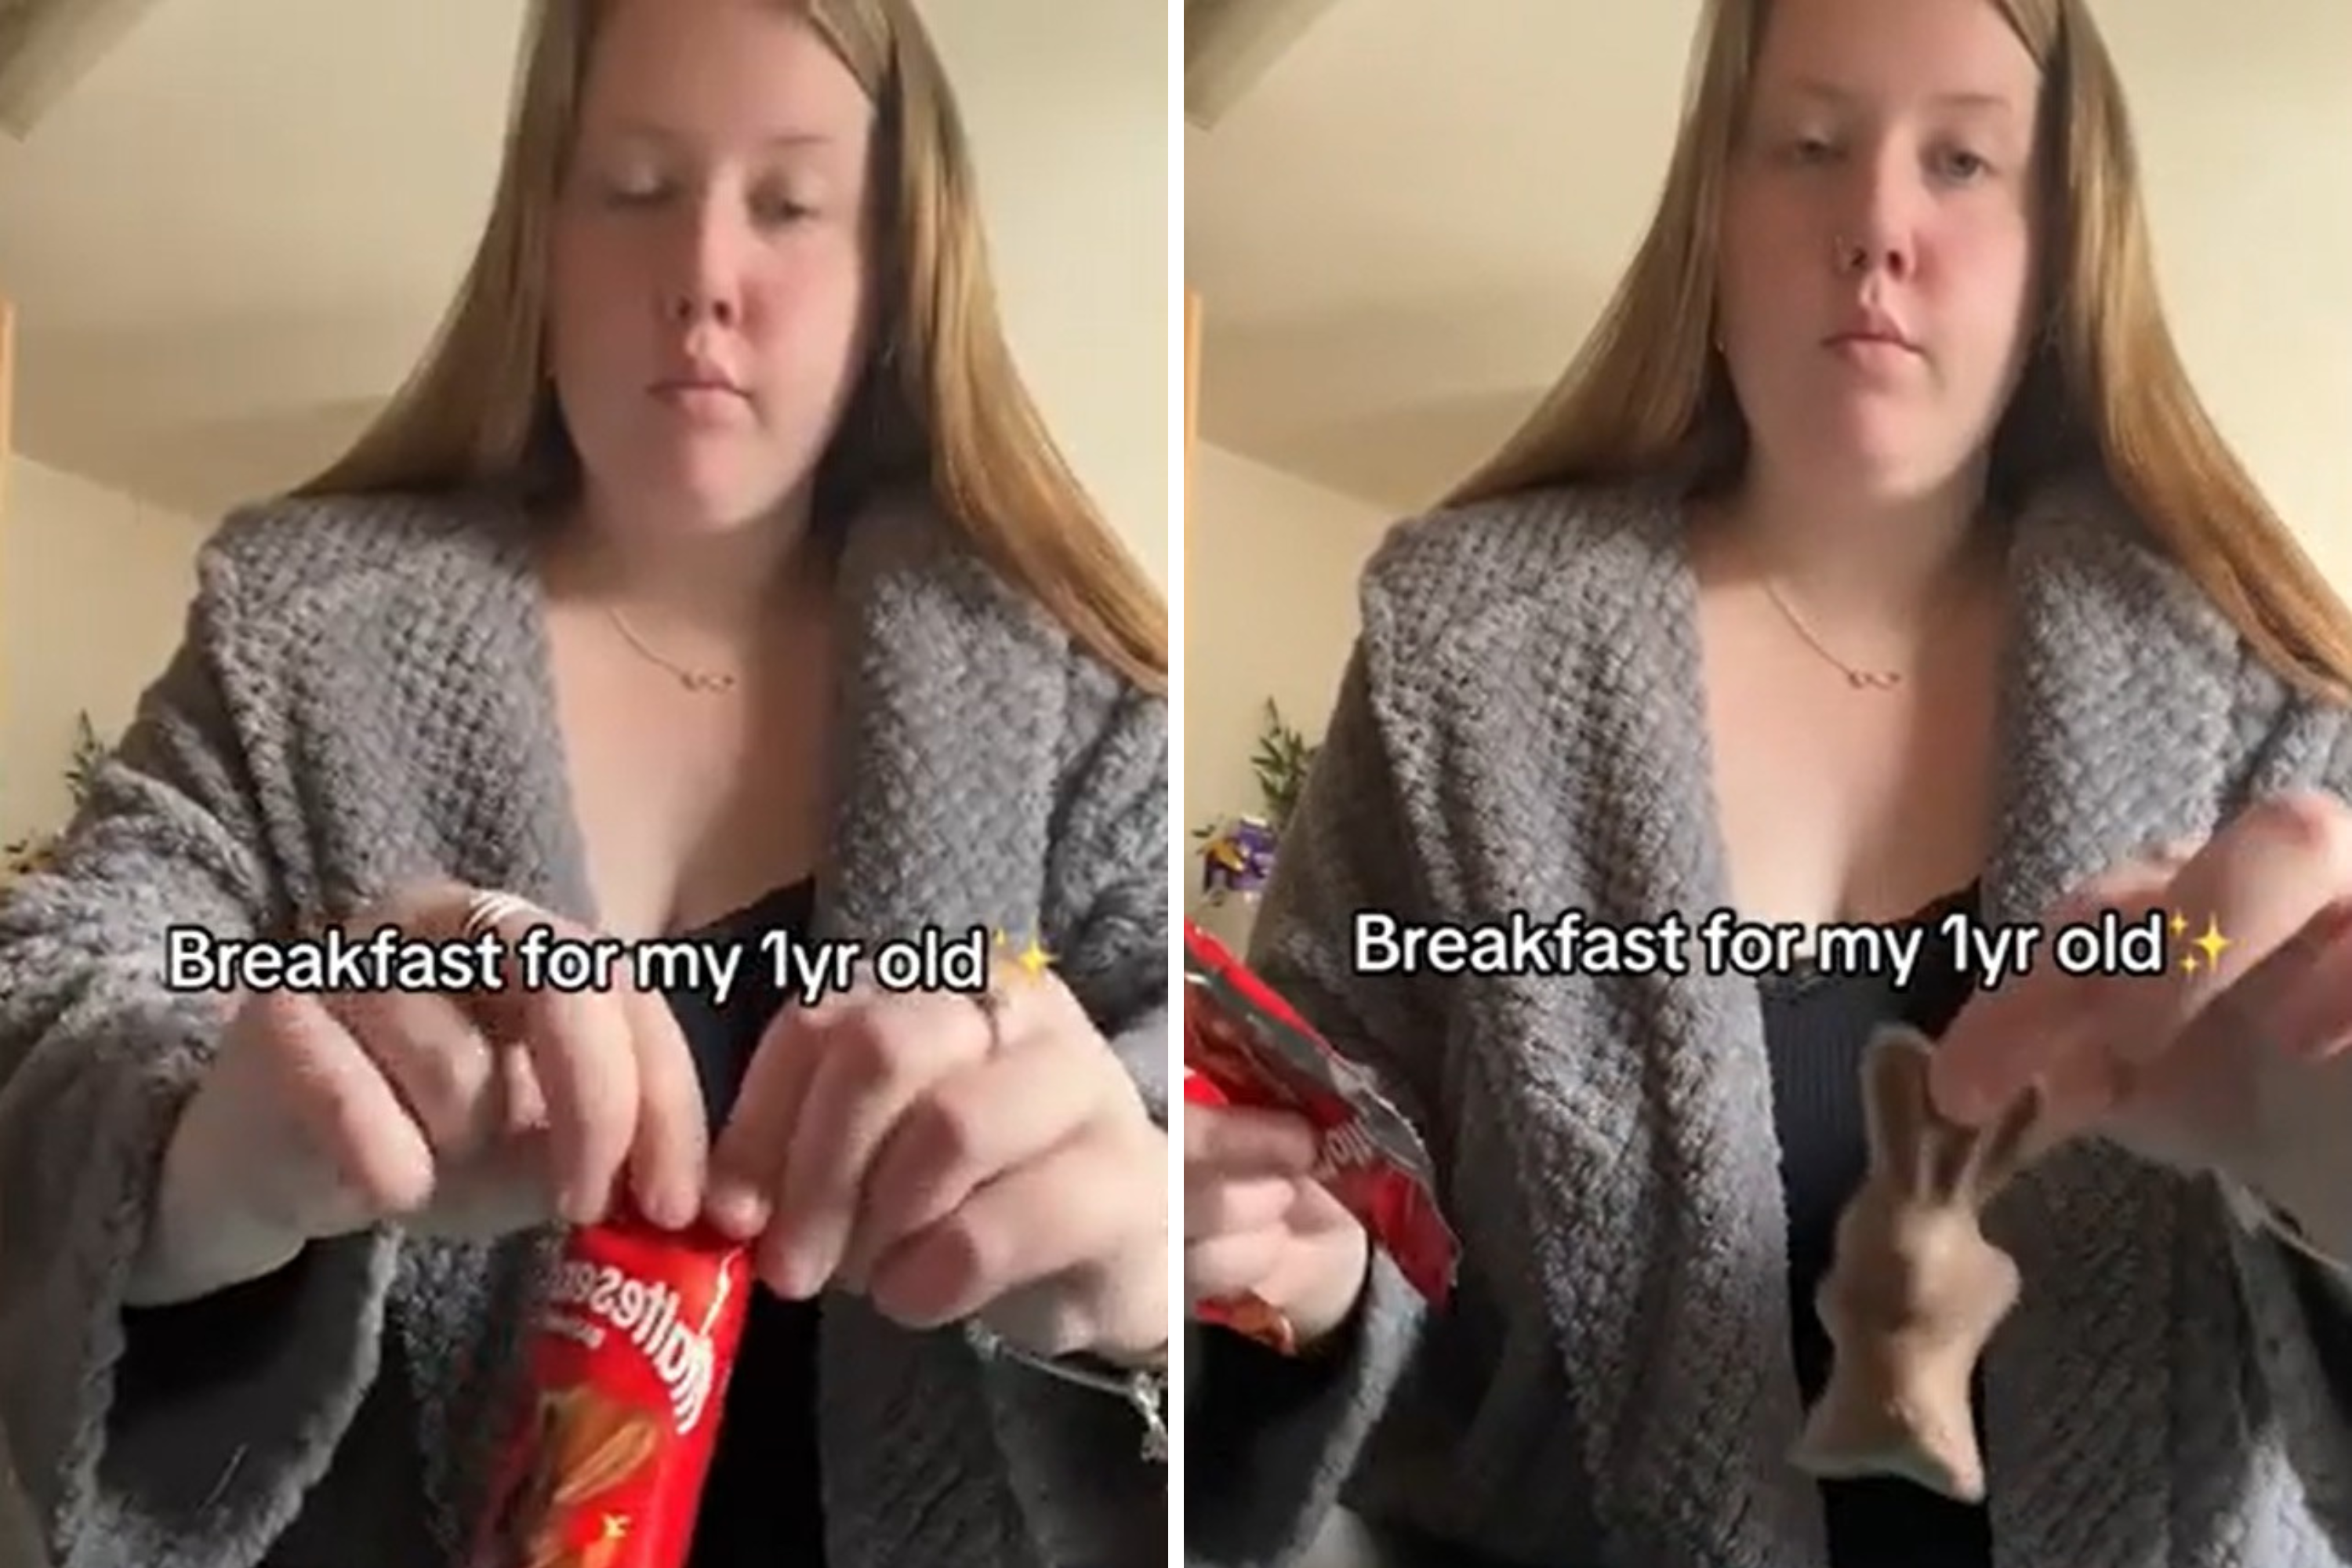 Fury over mom’s unconventional breakfast for toddler, but there’s a twist